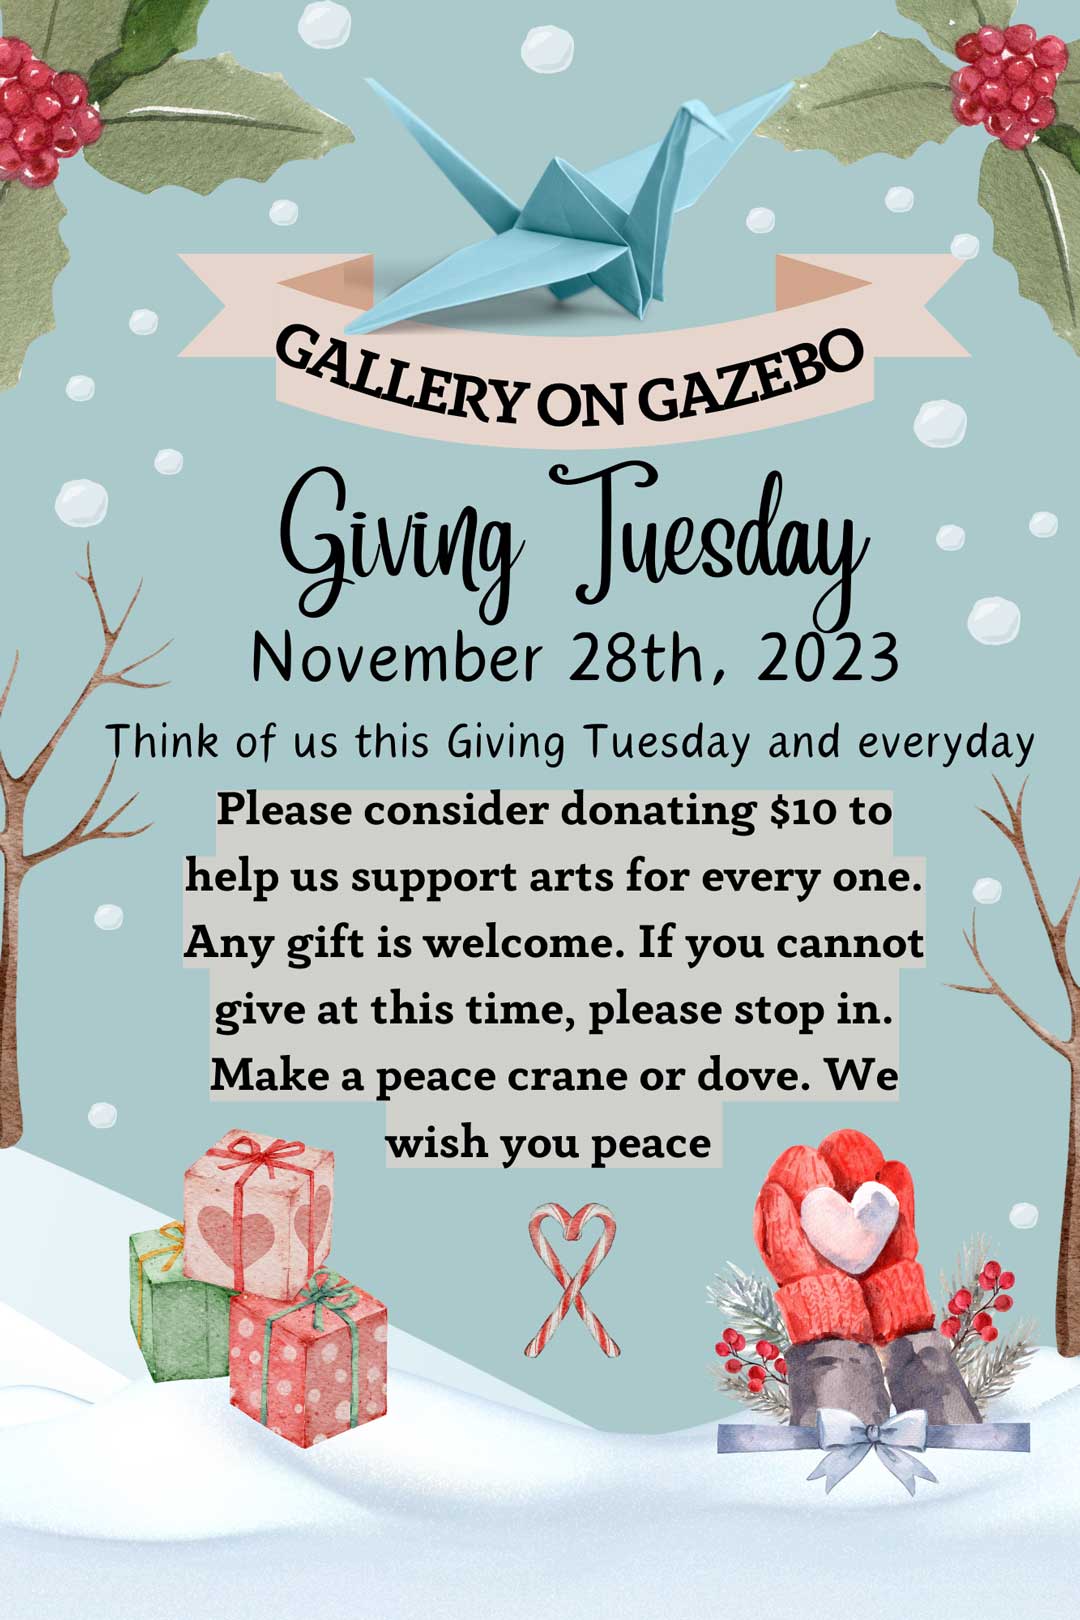 Giving Tuesday Gallery on Gazebo Poster 2023